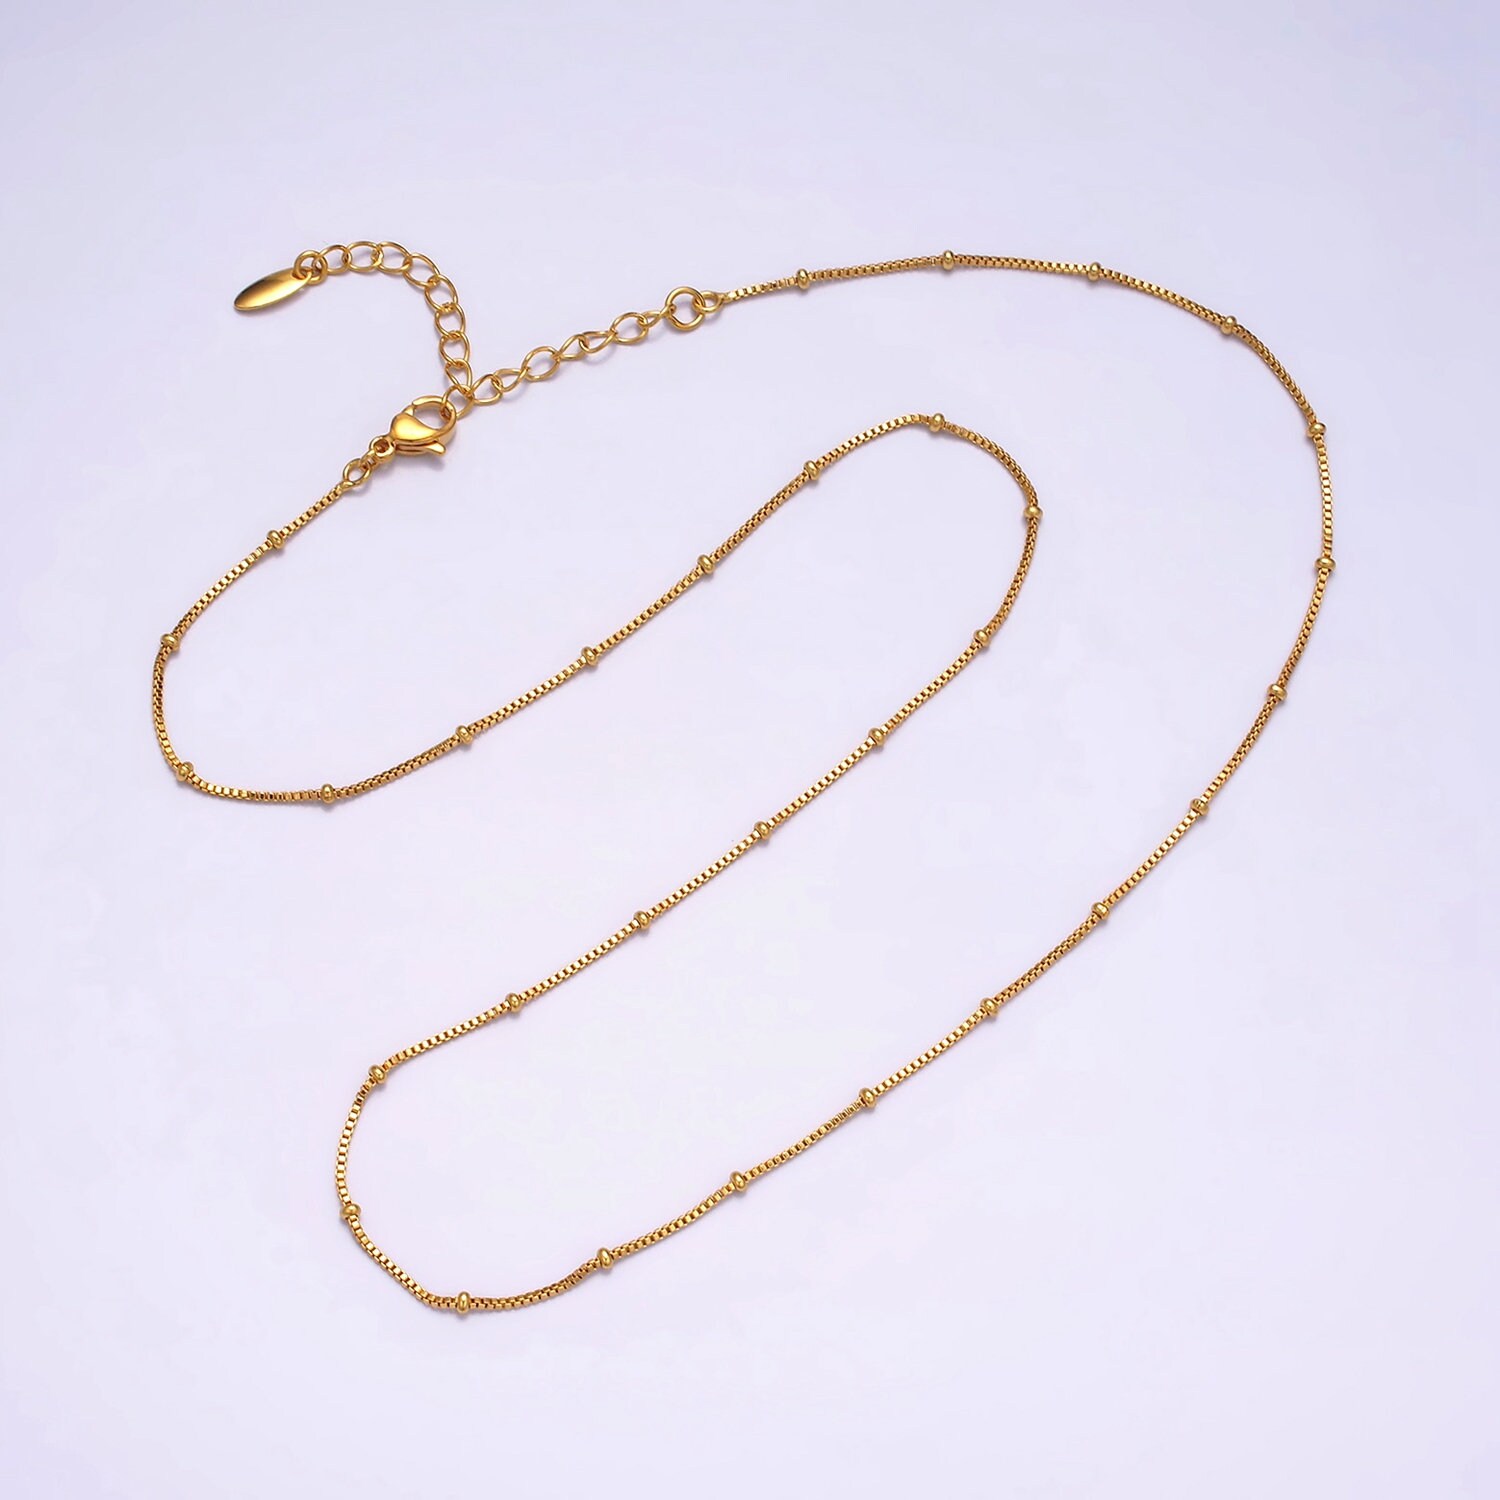 Gold Filled Chain Extender For Necklace Bracelet Supply Component